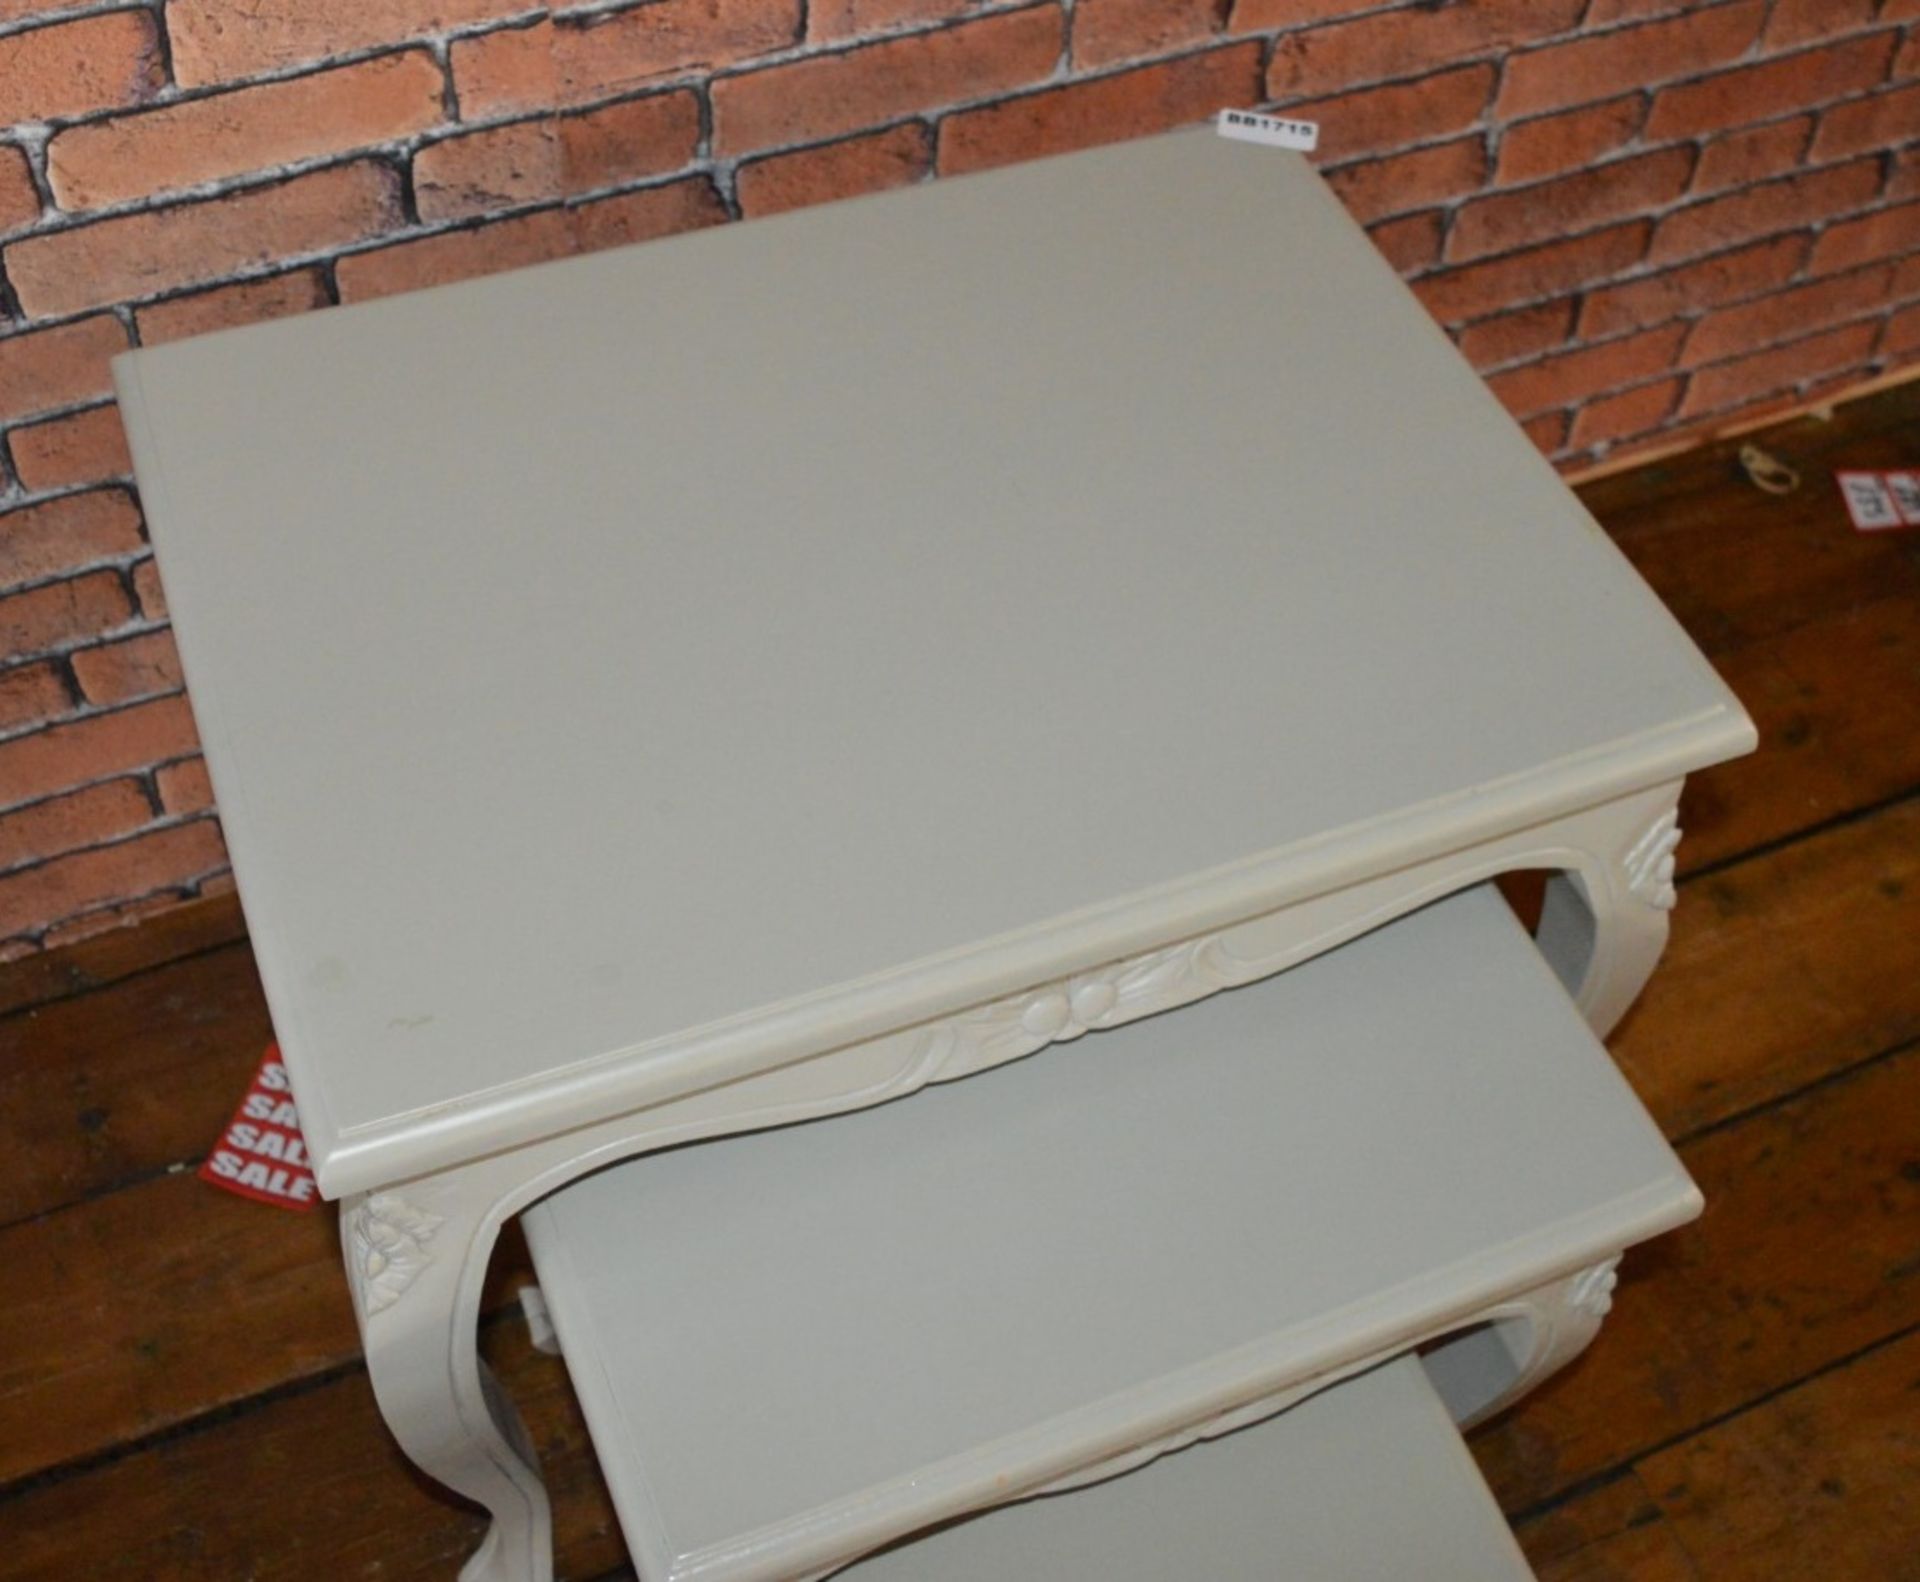 1 x Nest of Three Tables Finished in a Contemporary Grey - H61 x W59 x D45 cms - Ref BB1715 2F - - Image 6 of 6